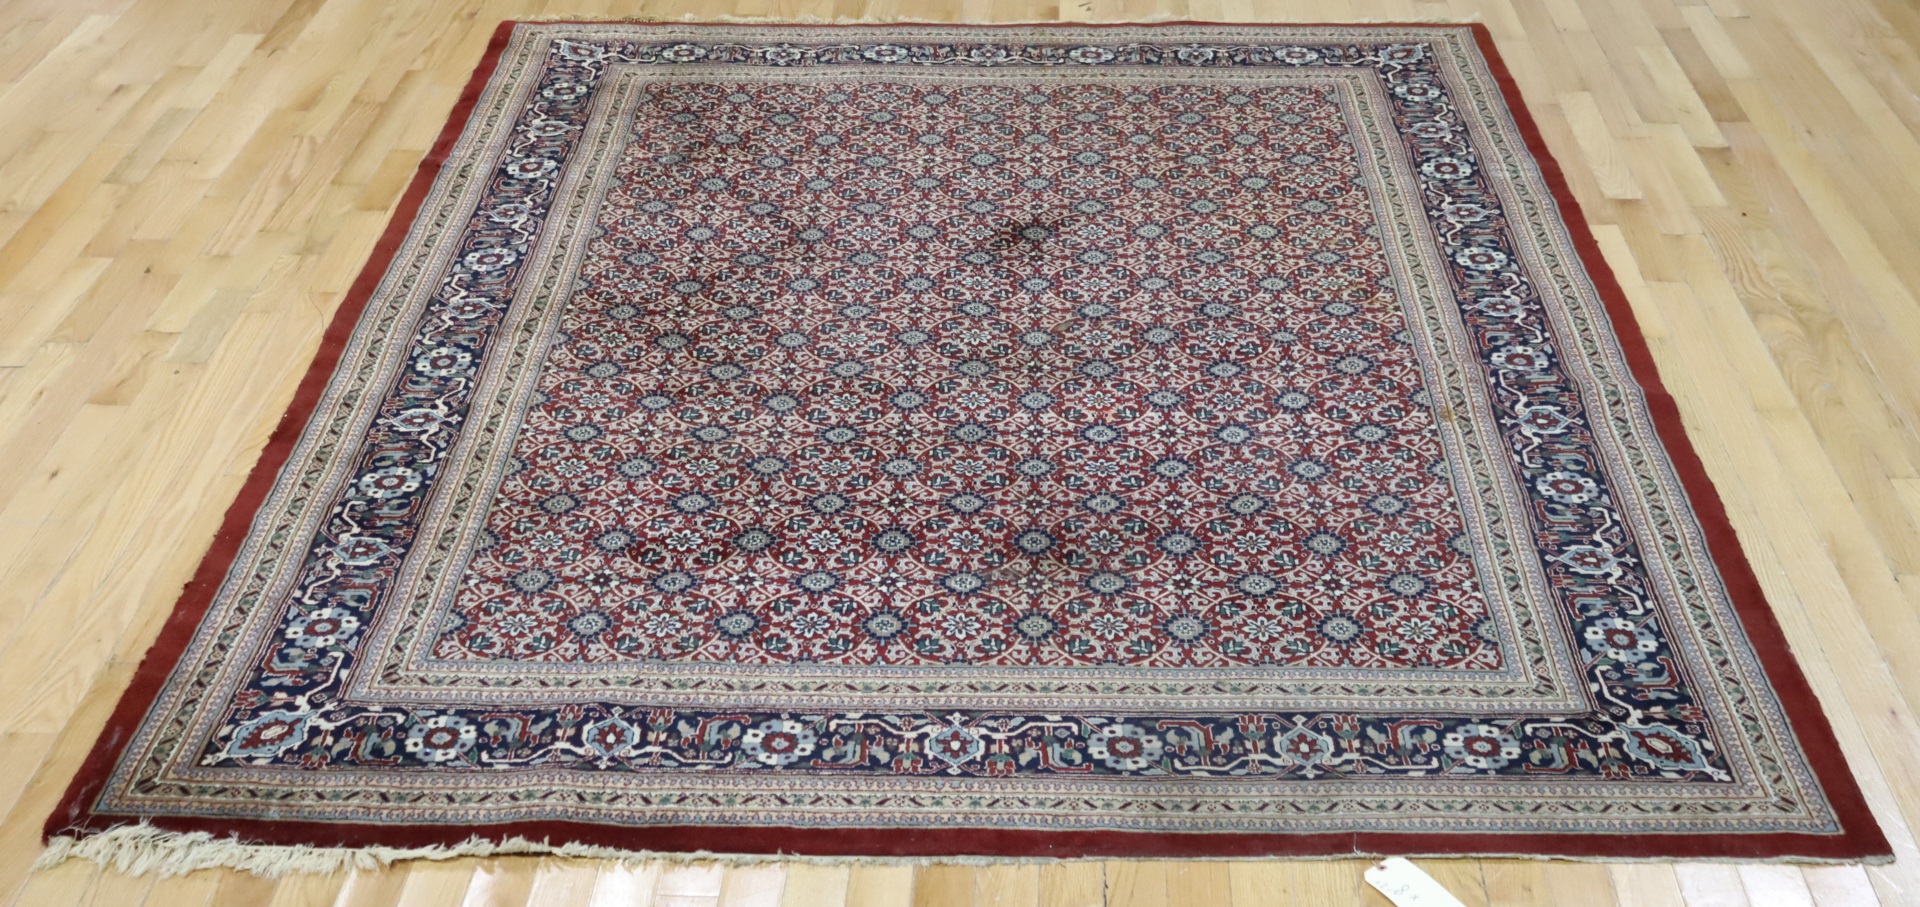 VINTAGE AND FINELY HAND WOVEN CARPET.